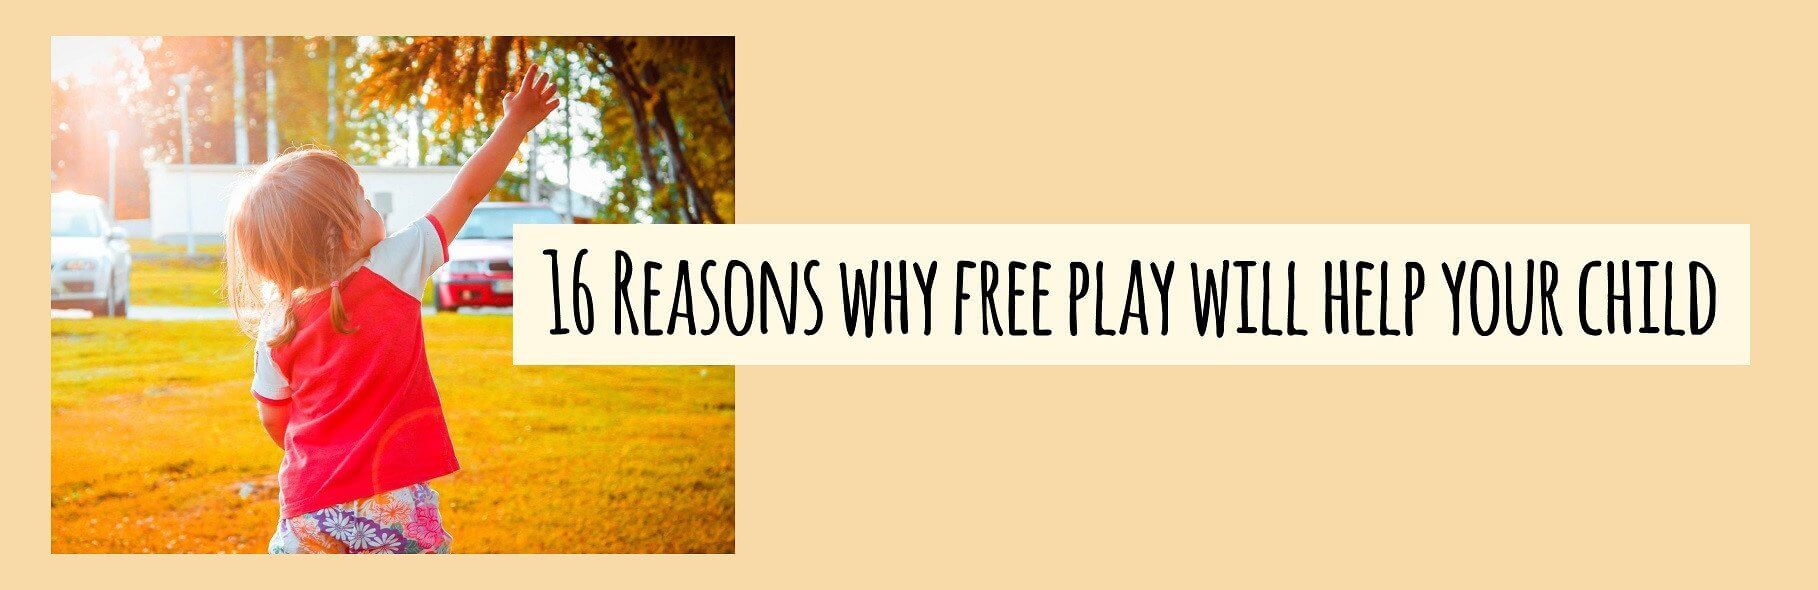 16 Reasons Why Free Play Will Help Your Child